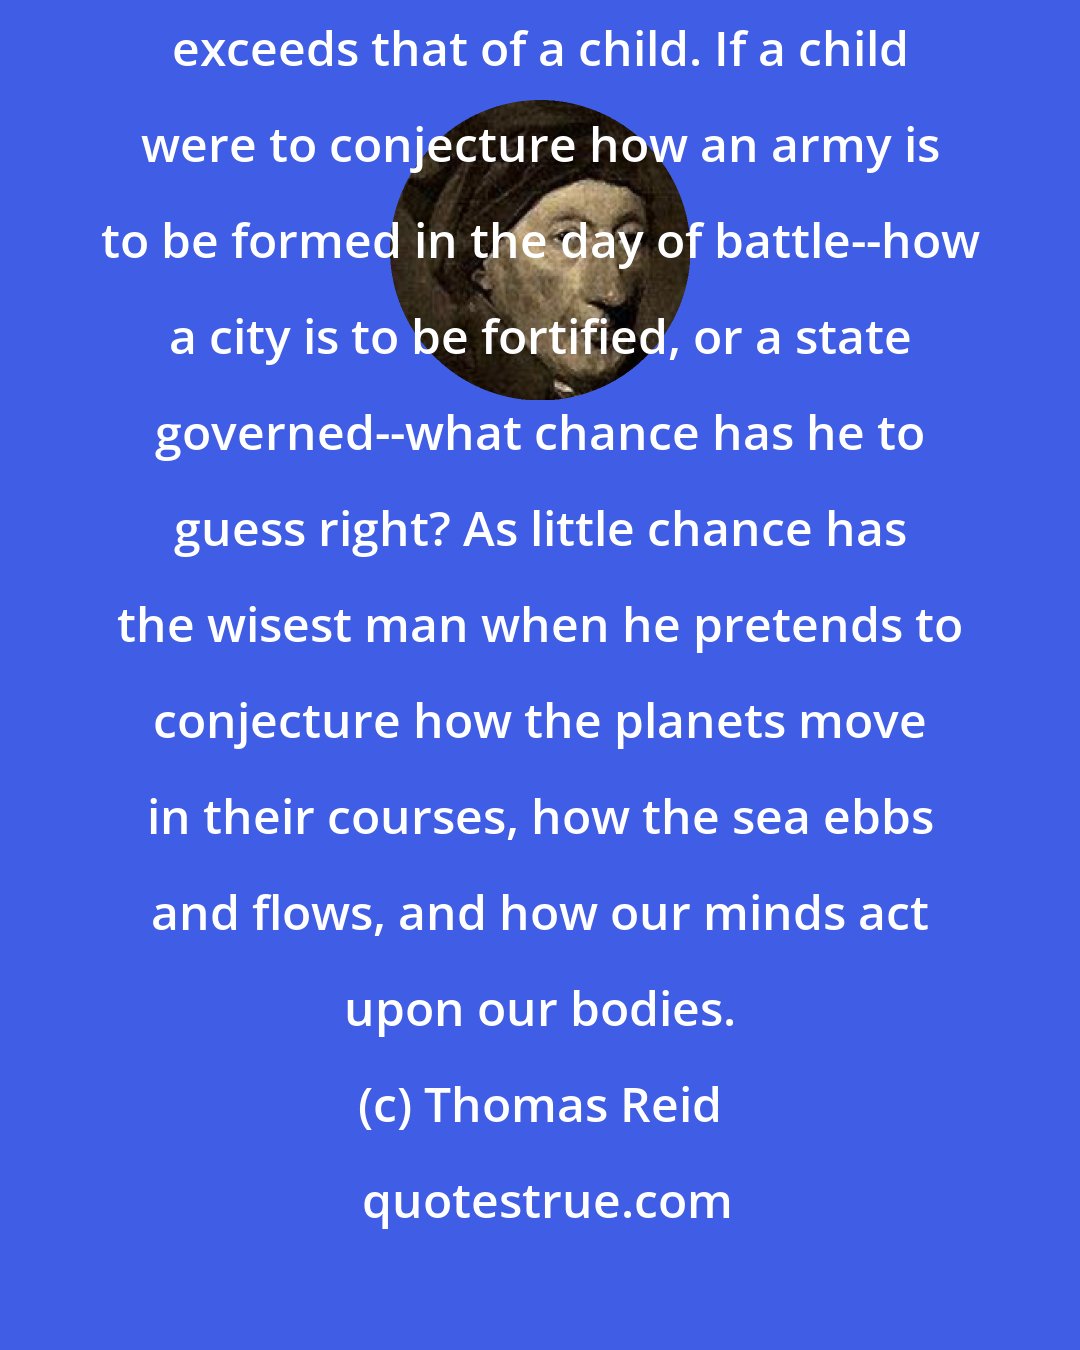 Thomas Reid: The wisdom of God exceeds that of the wisest man, more than his wisdom exceeds that of a child. If a child were to conjecture how an army is to be formed in the day of battle--how a city is to be fortified, or a state governed--what chance has he to guess right? As little chance has the wisest man when he pretends to conjecture how the planets move in their courses, how the sea ebbs and flows, and how our minds act upon our bodies.